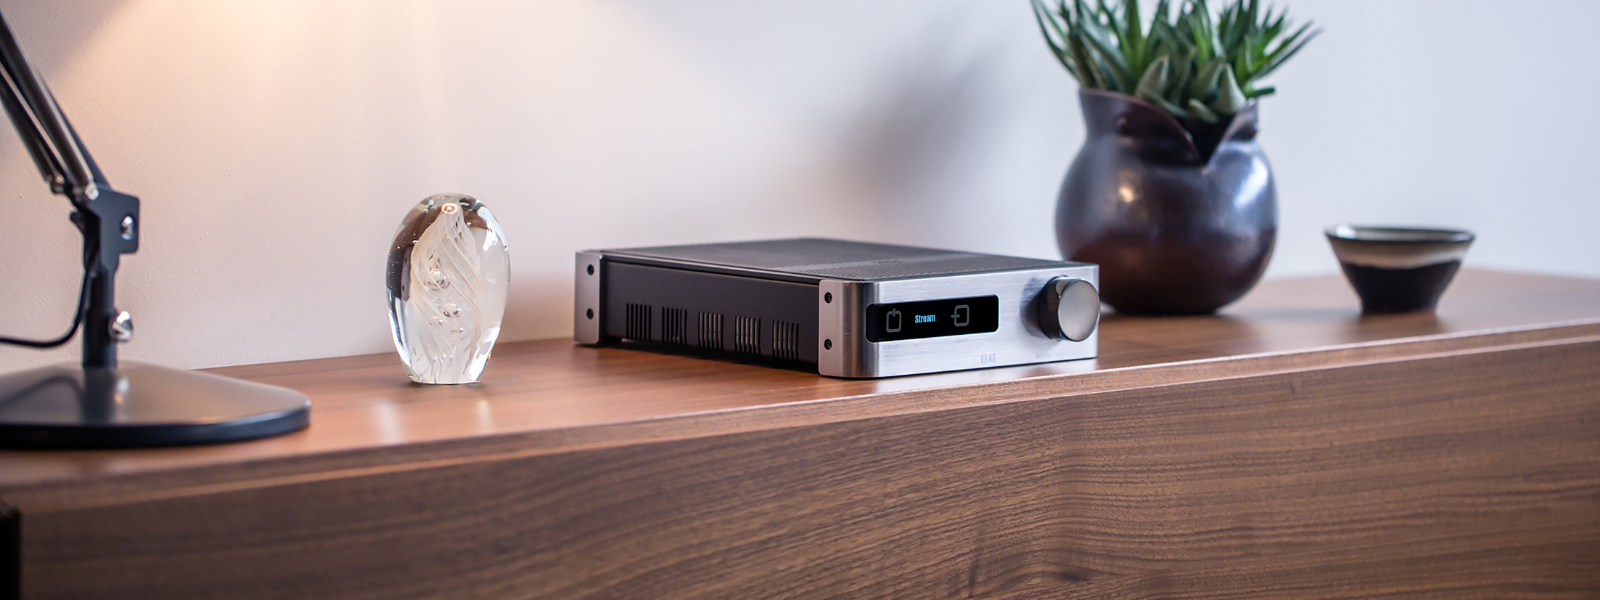 ELAC DS-A101 Discovery 80w+80w Integrated Amplifier With Streaming